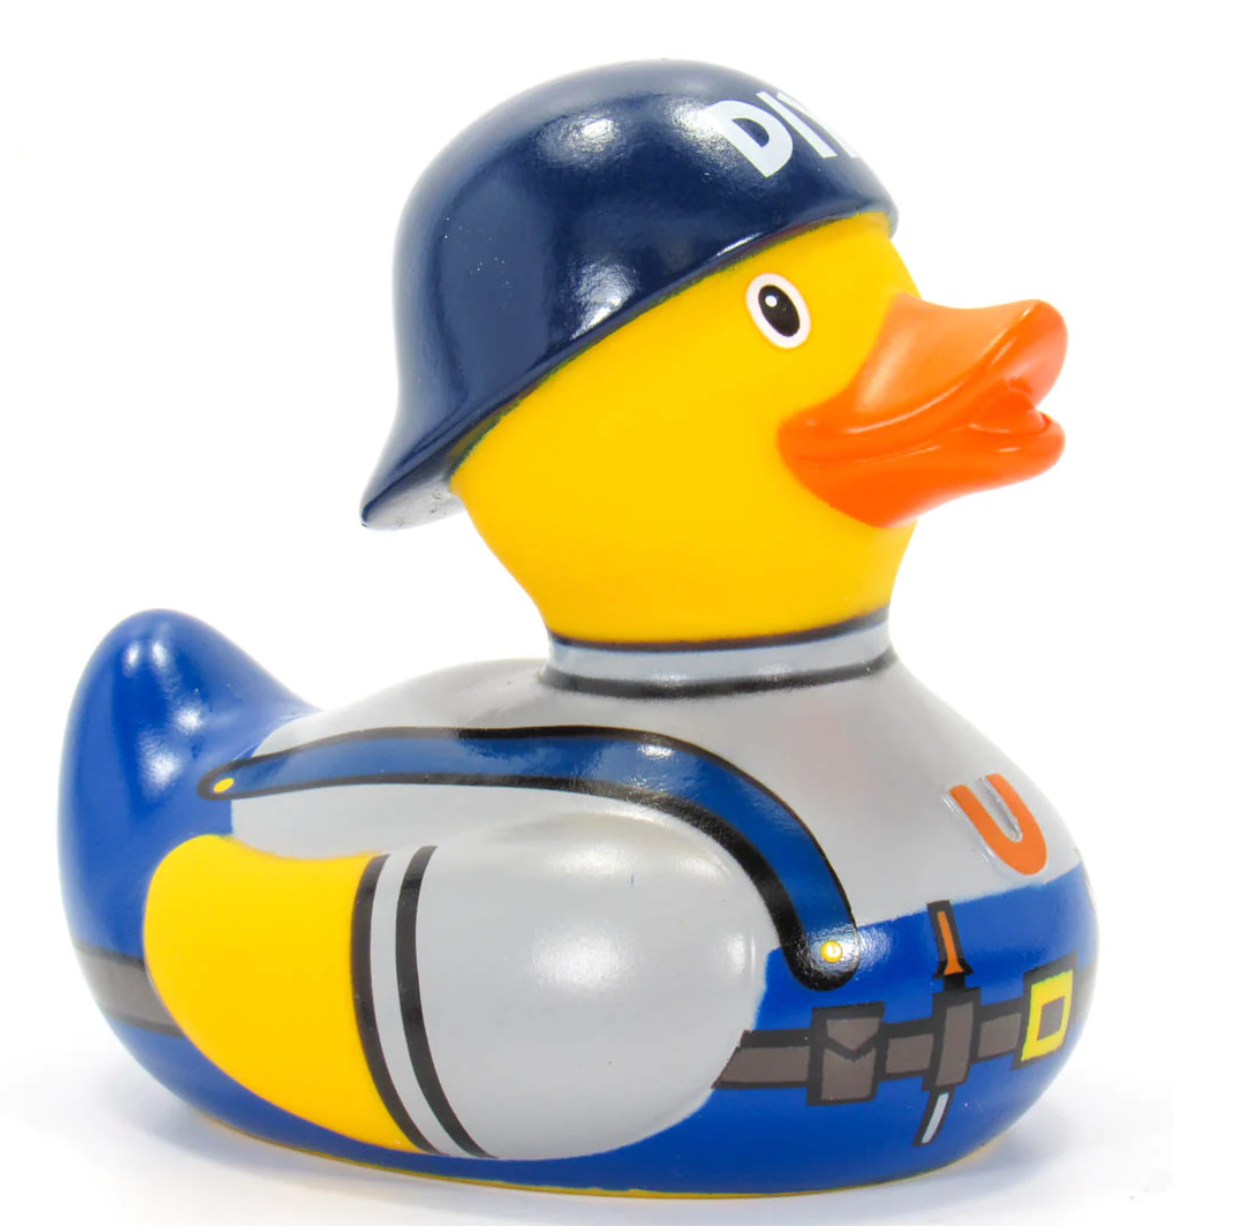 DIY Rubber Duck - Can Do